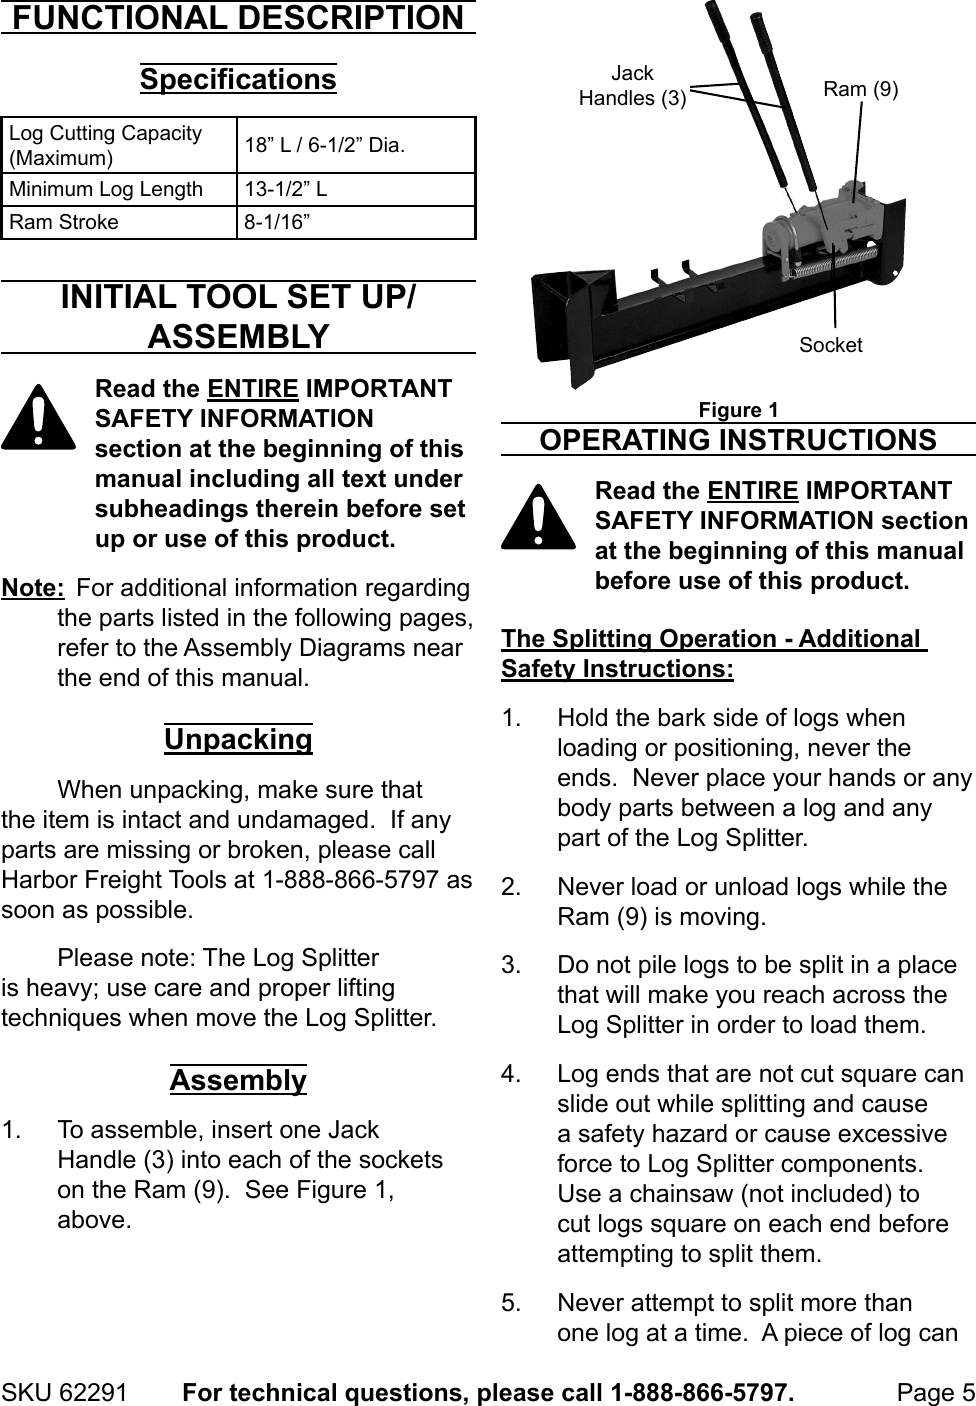 Page 5 of 12 - Manual For The 62291 10 Ton Hydraulic Log Splitter